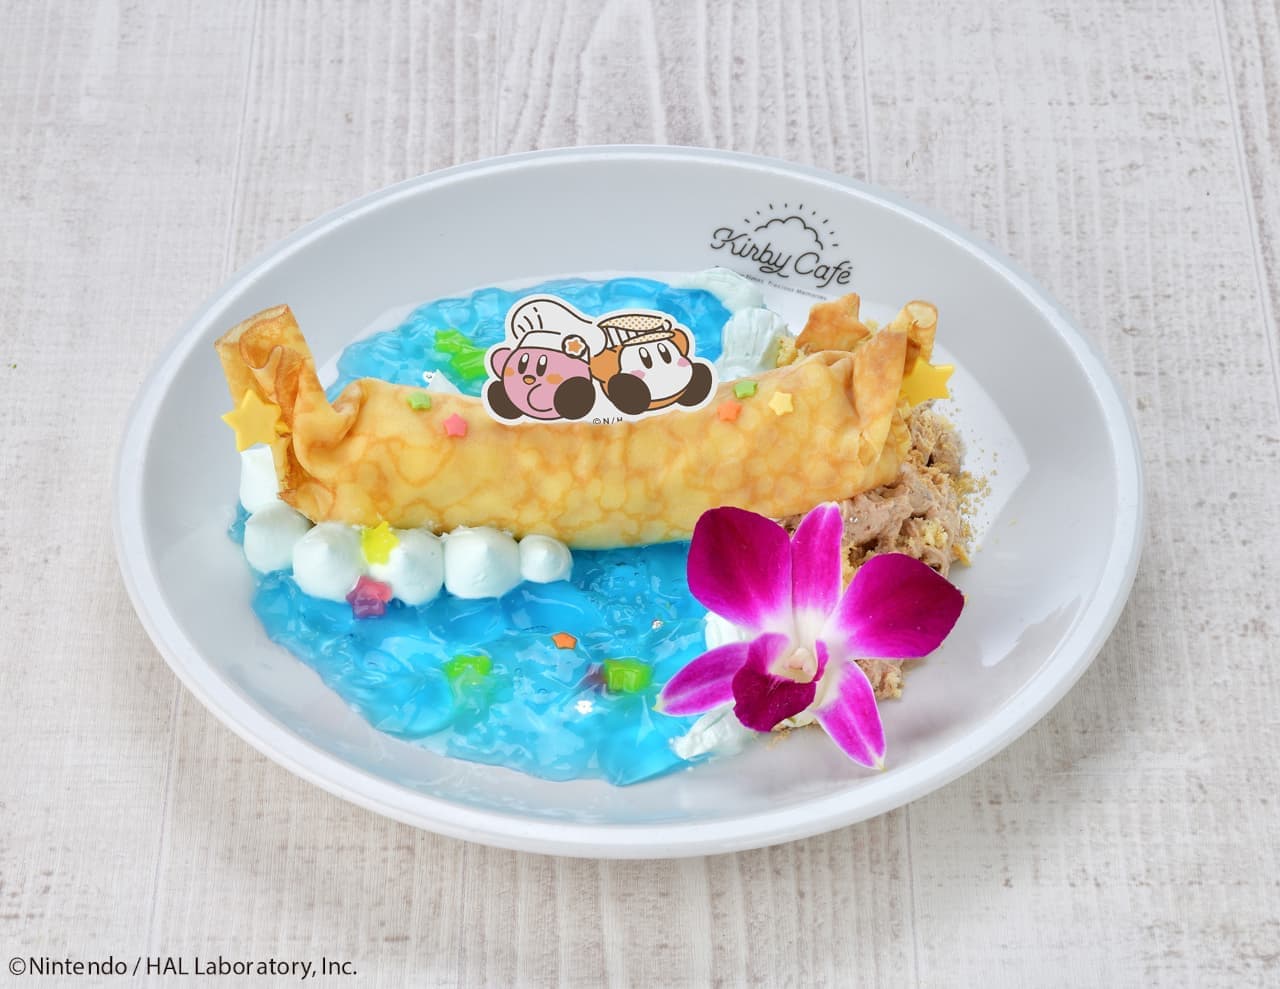 “Kirby Cafe Summer 2021” for a limited time